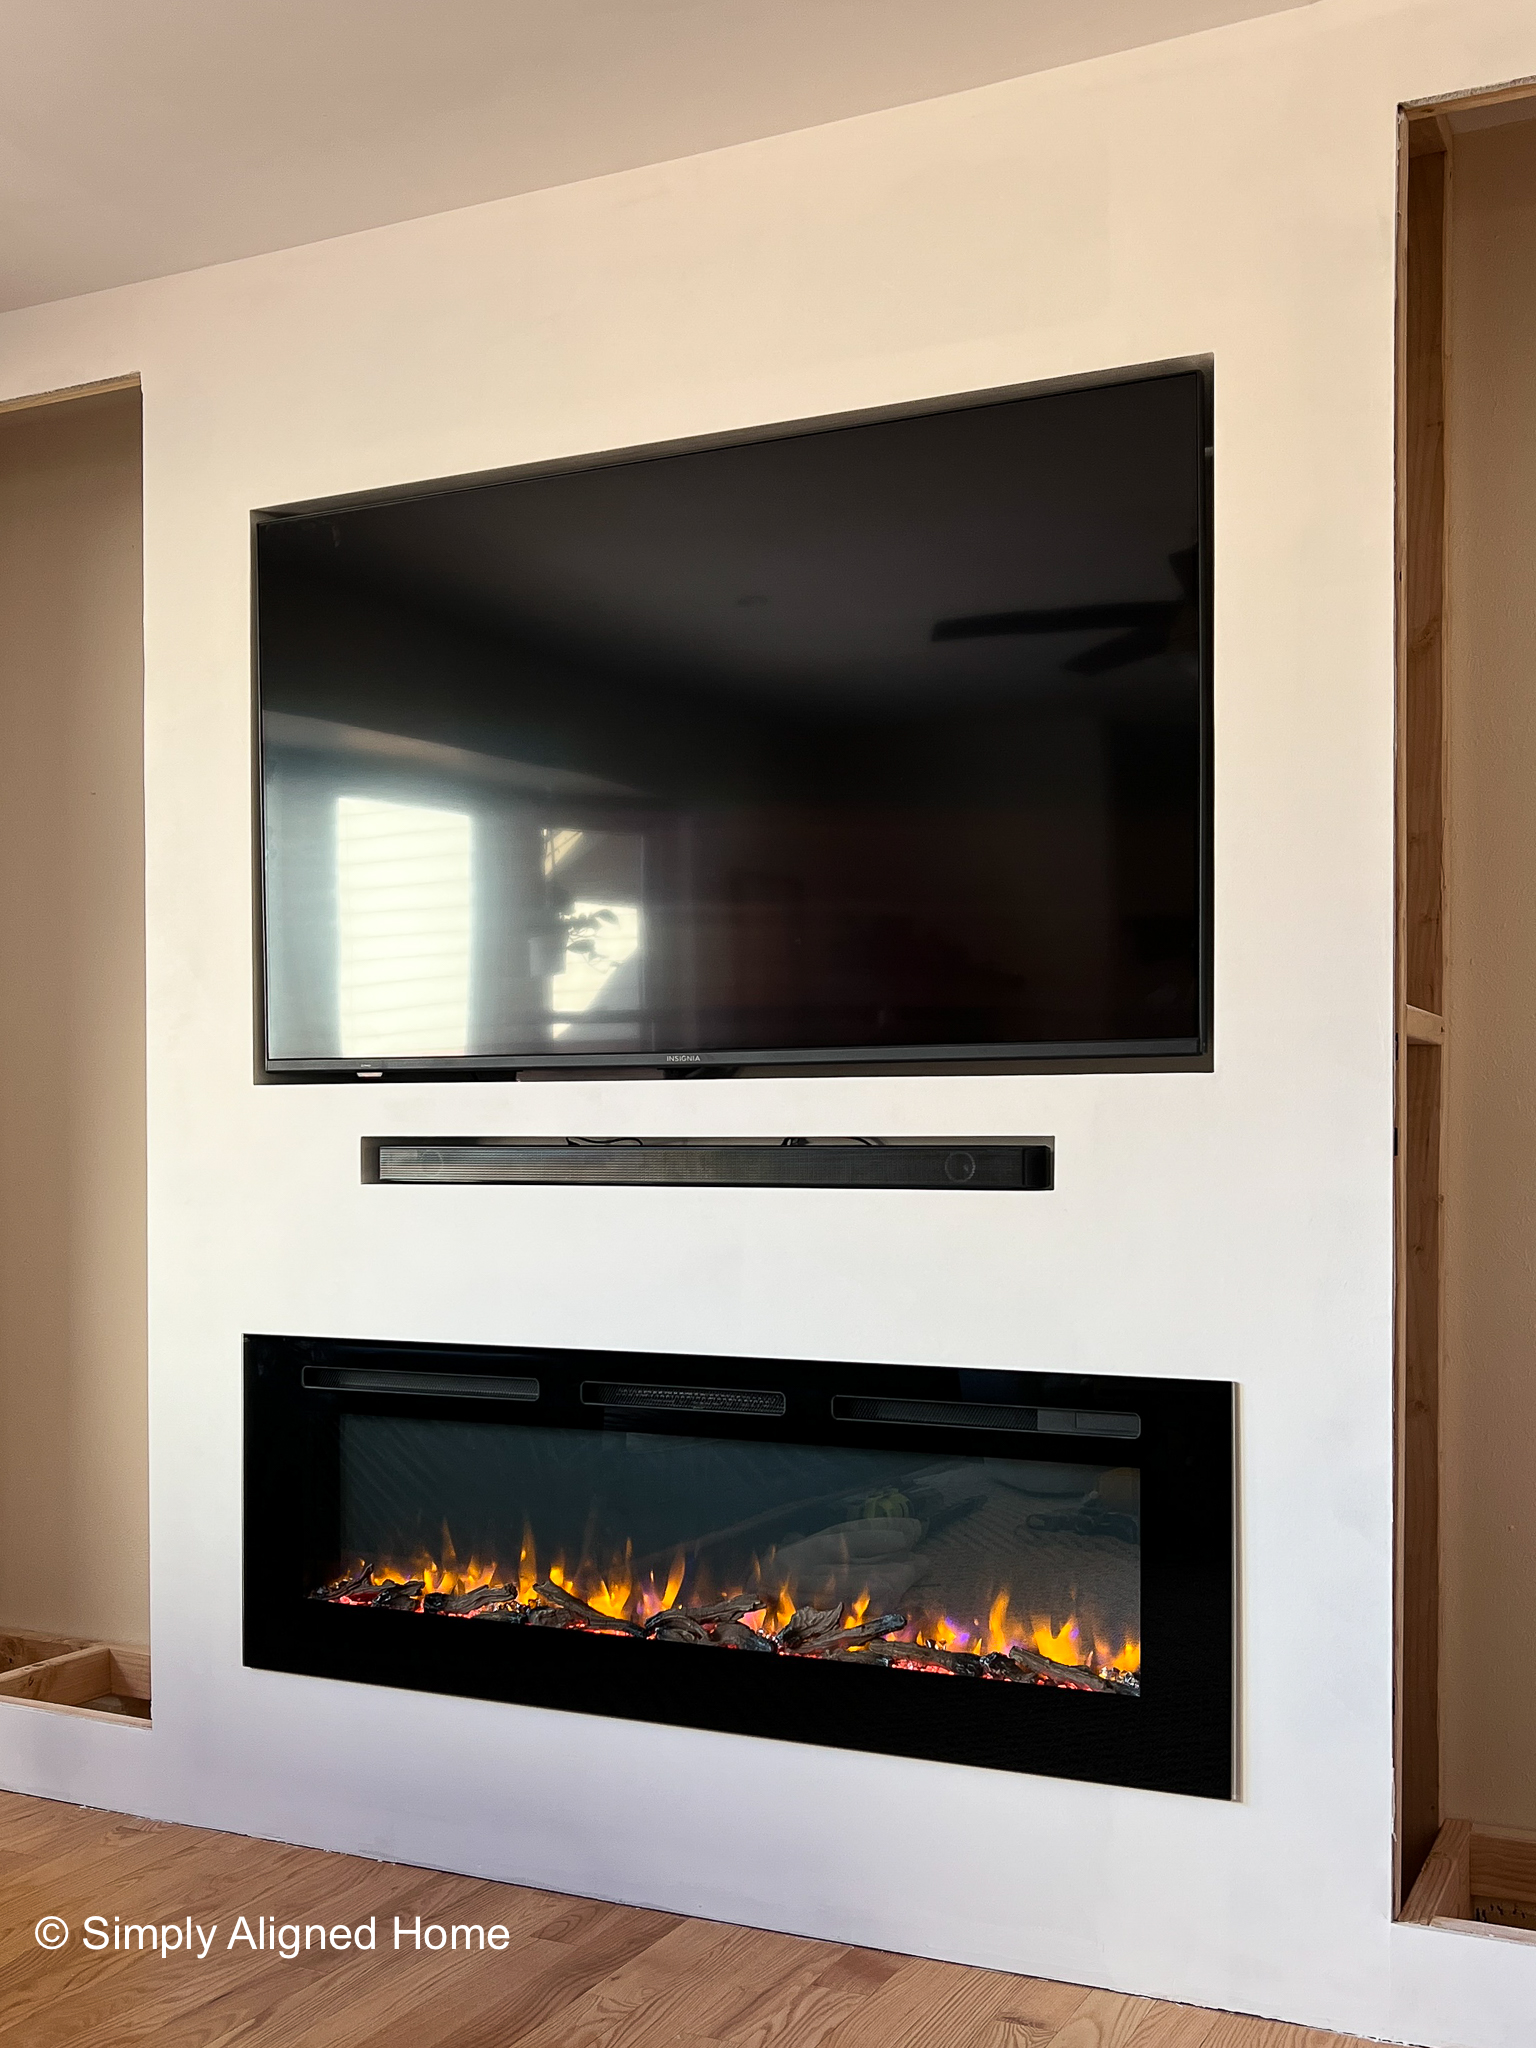 DIY ELECTRIC FIREPLACE BUILT-IN: How to Frame and Install the Fireplace -  Simply Aligned Home